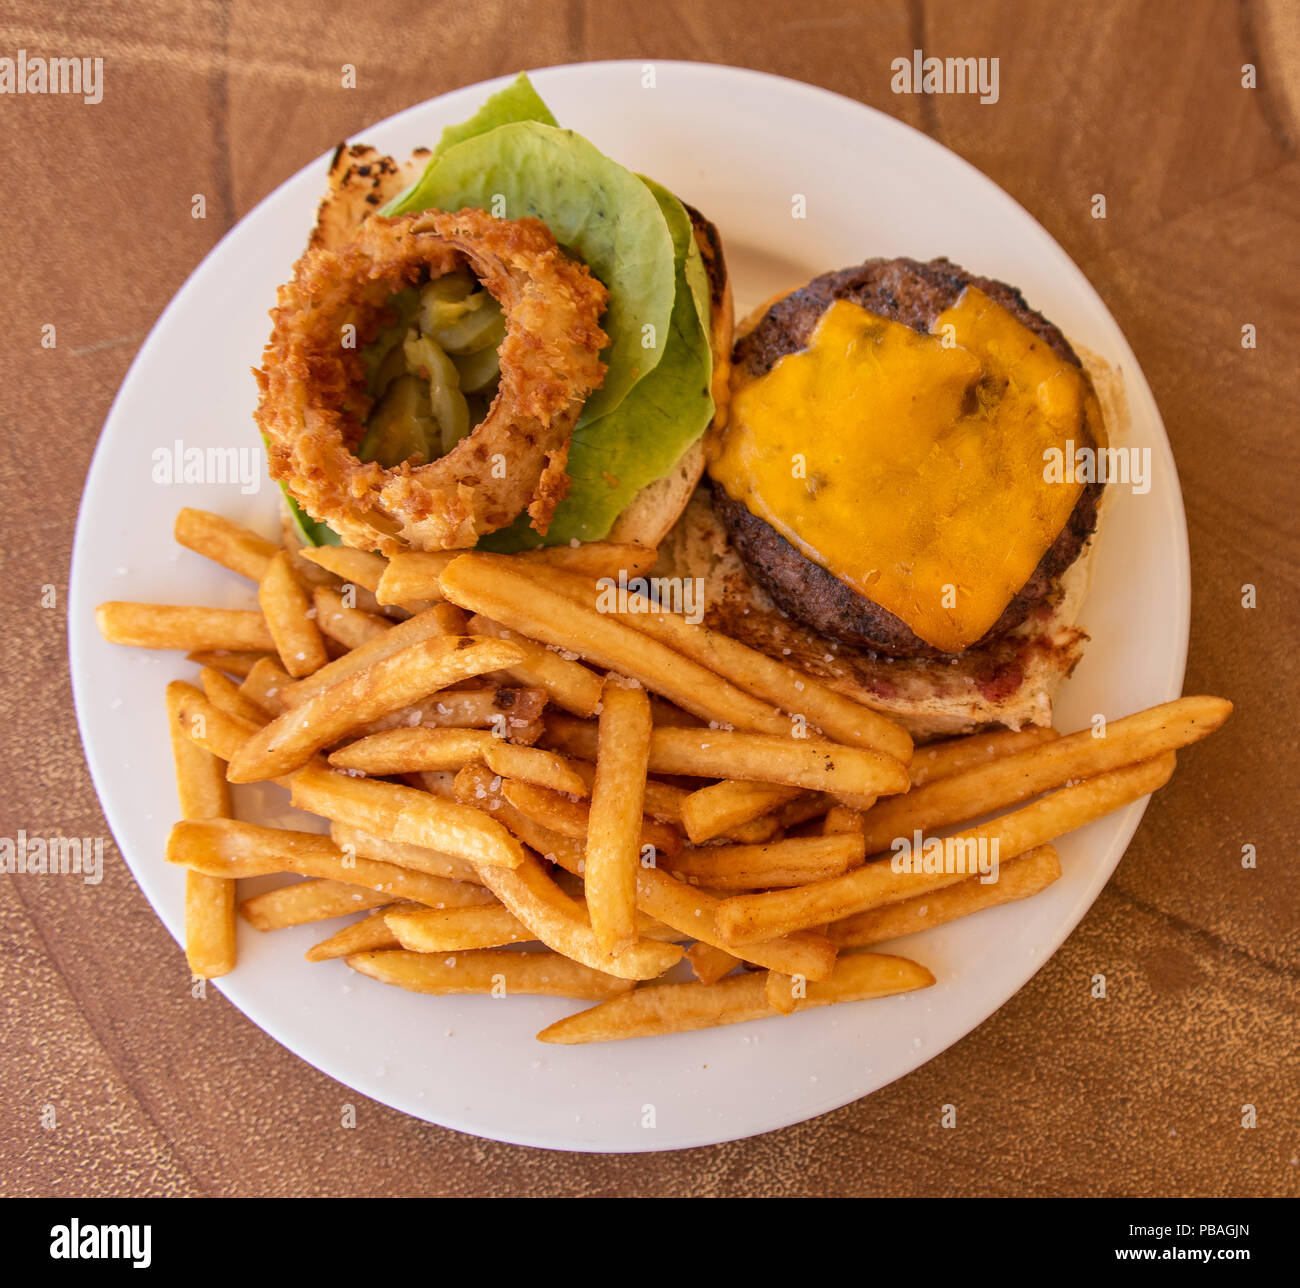 Cheeseburger With French Fries And Lettuce On White Plate Stock Photo